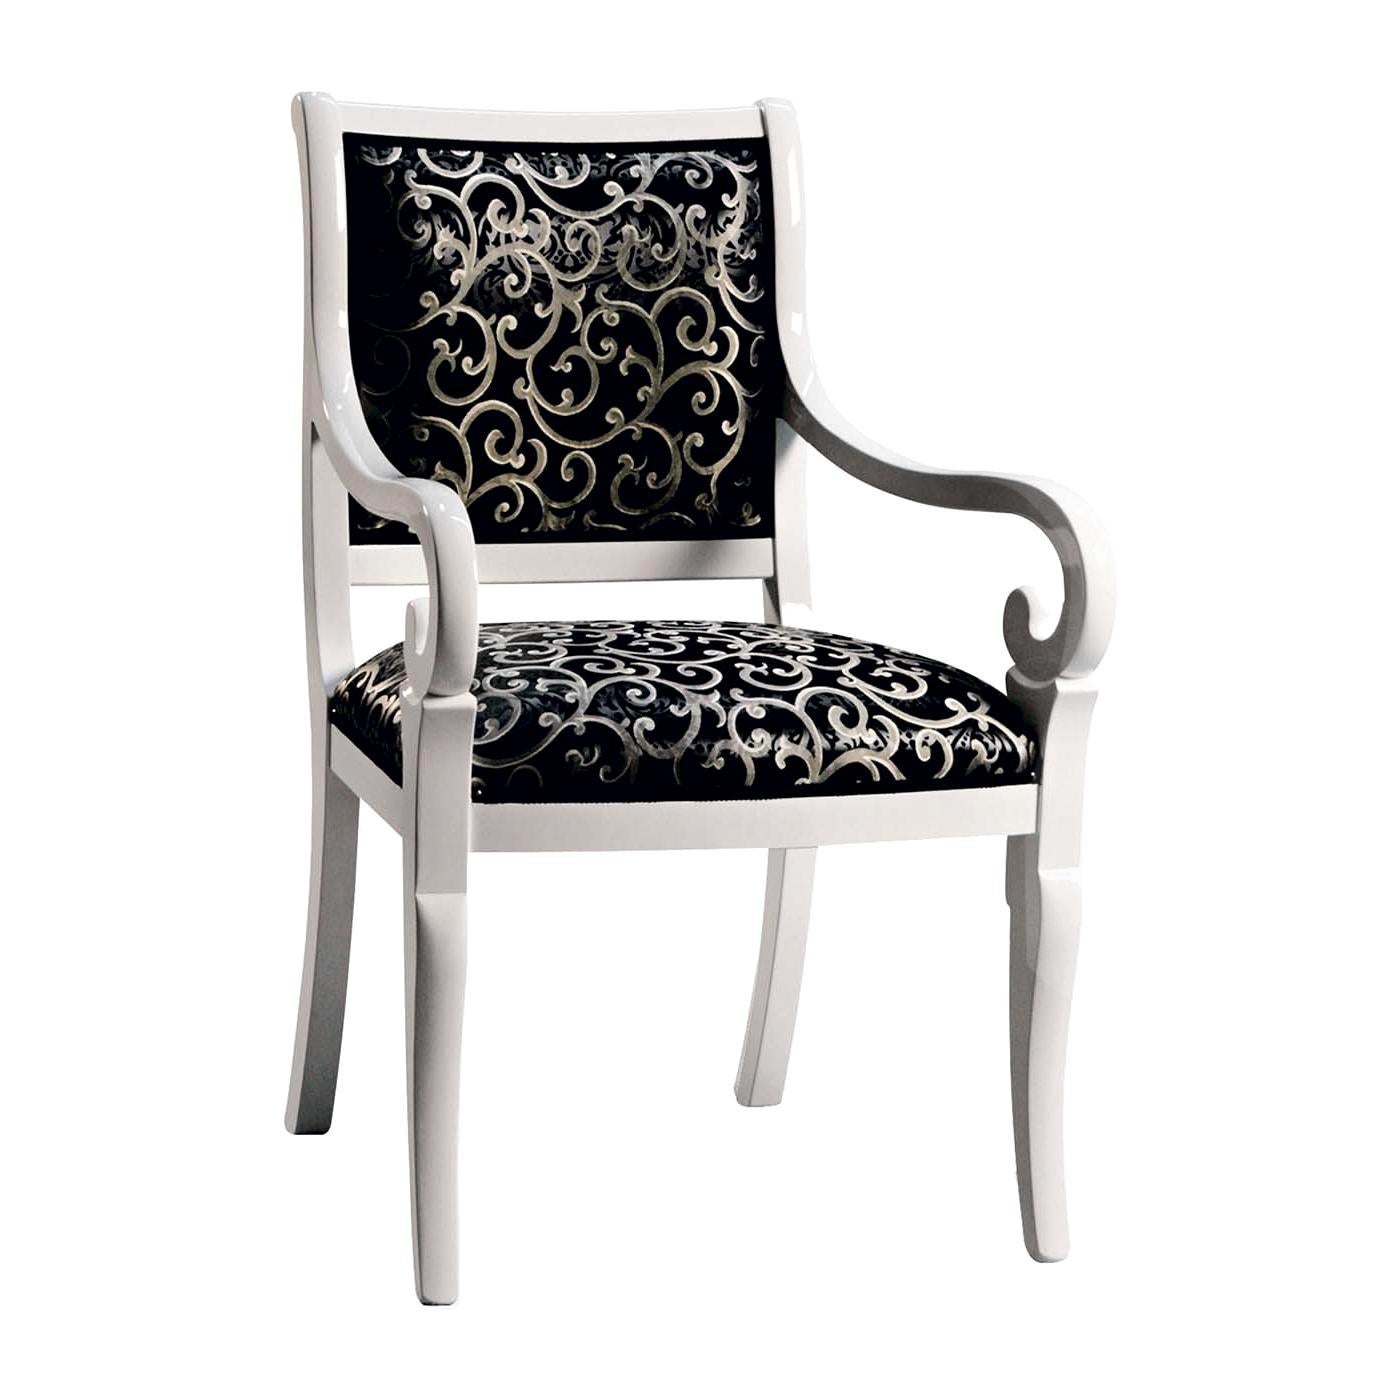 Capotavola Black and White Chair with Armrests